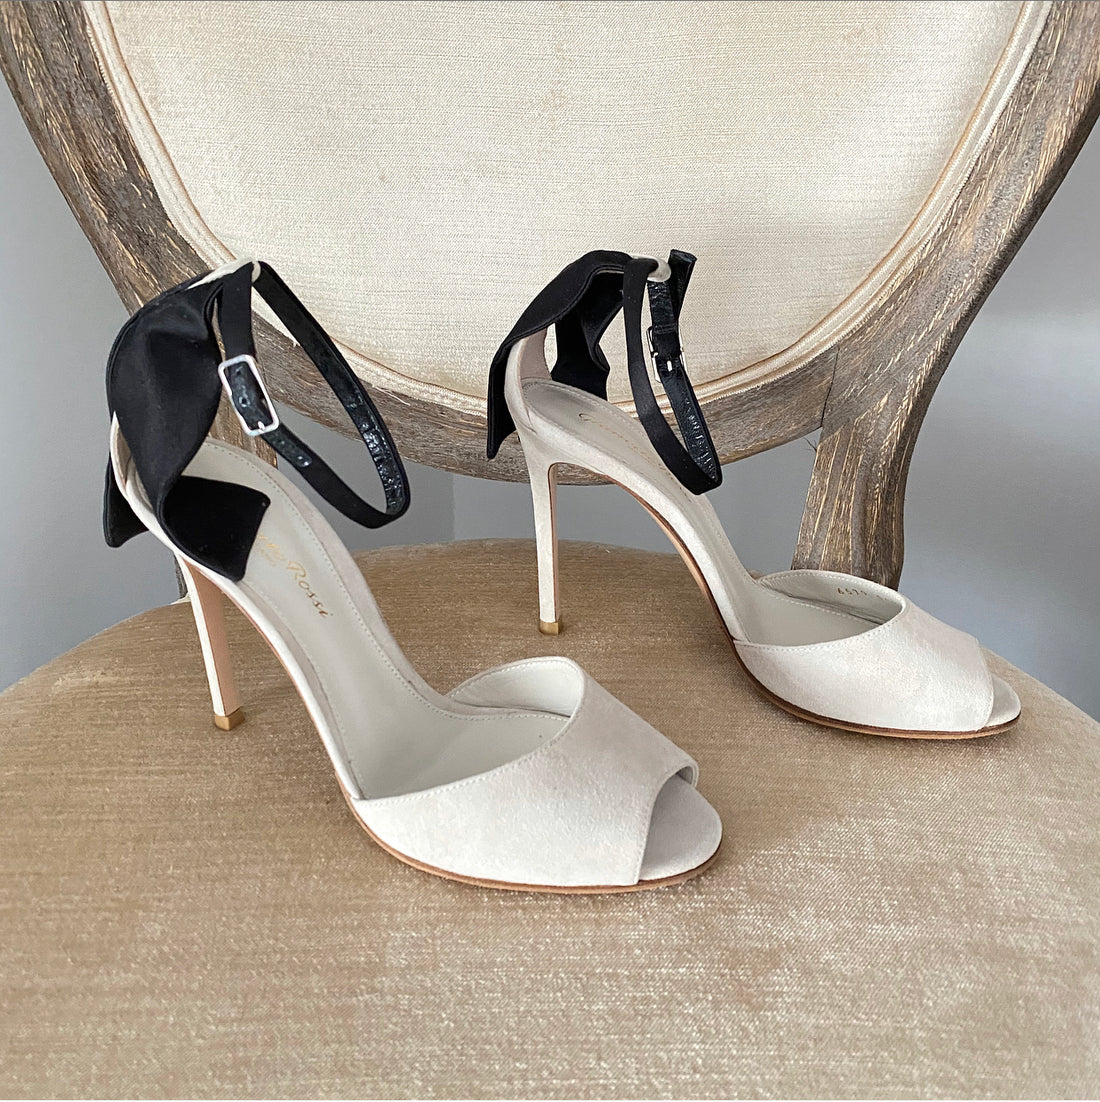 Gianvito Rossi Light Grey Suede Heels with Black Satin Detail - 36 / 5.5